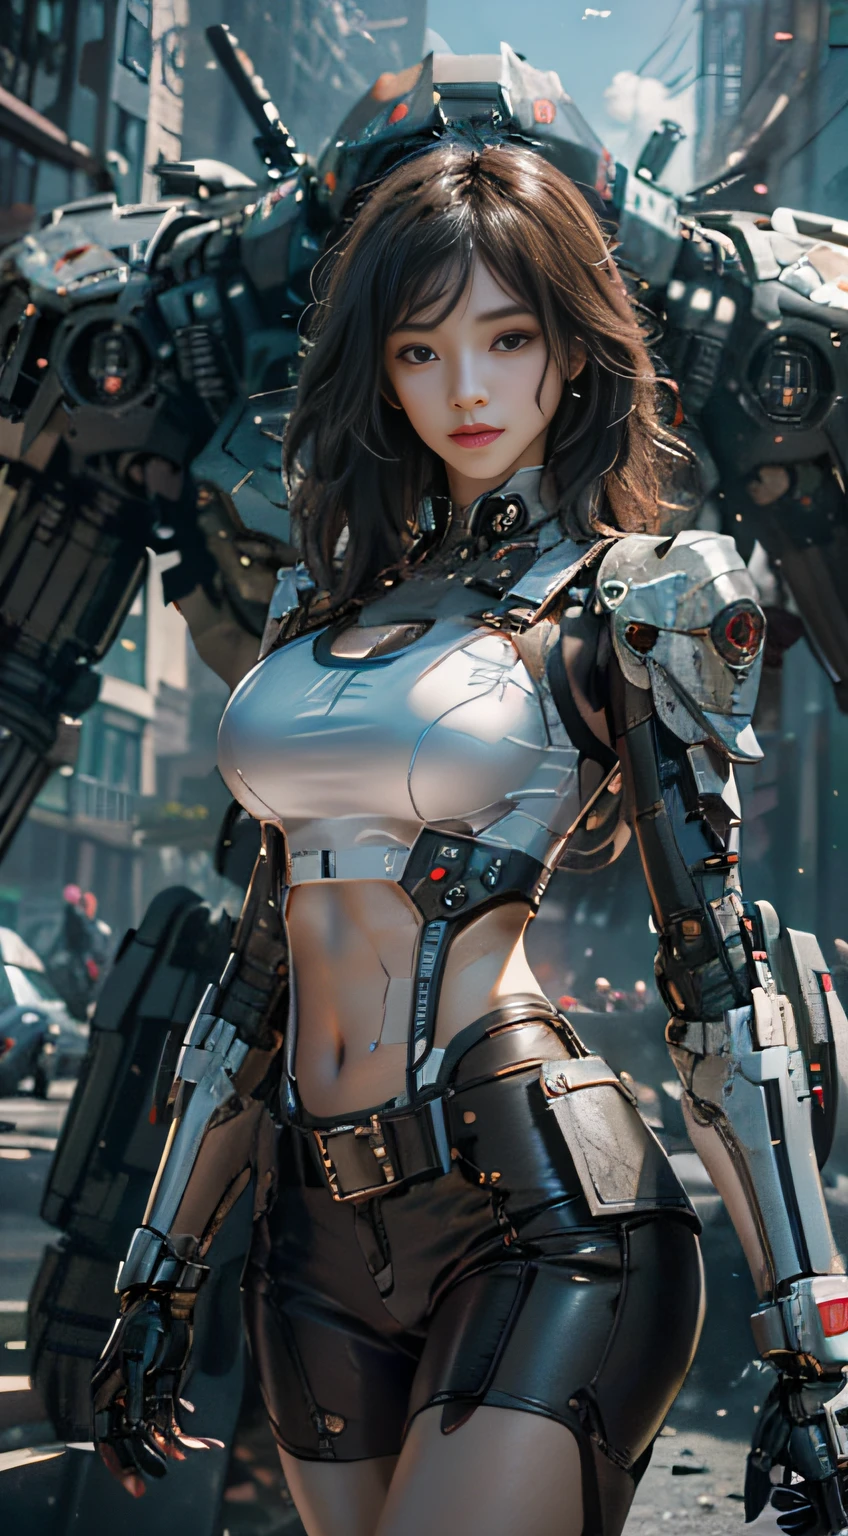 （（best qualtiy））， （（tmasterpiece））， （The is very detailed：1.3）， 3D， Shitu-mecha， Beautiful cyberpunk woman with her pink mech in the ruins of the city of Forgotten War， The navel and arms are exposed，Ancient Techniques， HDR（HighDynamicRange）， Ray traching， NVIDIA RTX， Hyper-Resolution， Unreal 5， sub surface scattering， PBR Texture， post-proces， Anisotropic filtering， depth of fields， Maximum clarity and sharpness， Many-Layer Textures， Albedo e mapas Speculares， Surface Coloring，Accurately simulate light-material interactions，perfectly proportions，rendering by octane，twotonelighting，Low ISO，White balance，trichotomy，Wide aperture，8K RAW，High-Efficiency Sub-Pixel，sub-pixel convolution，Luminous Particle，Light scattering，Tyndall effect（full bodyesbian）， （exquisitefacialfeatures）， （s the perfect face）， dynamic angle。